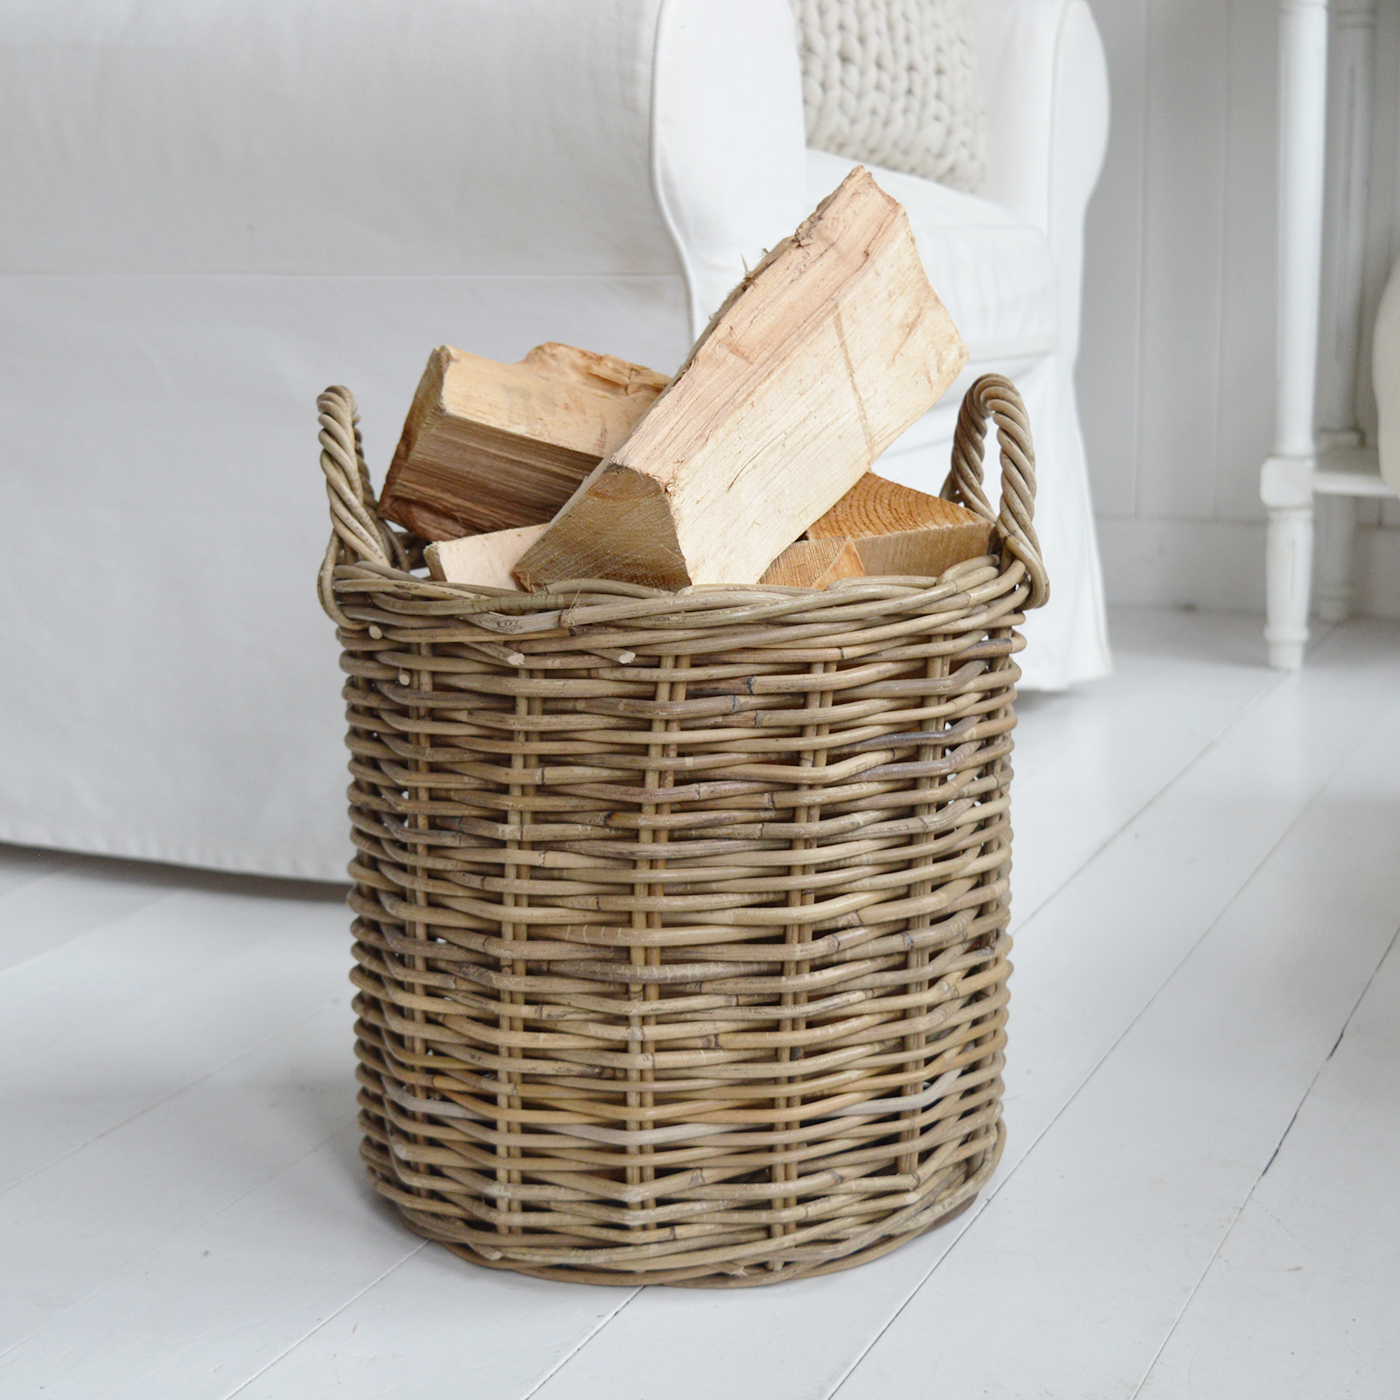 Casco Bay Grey basketware Willow storage toy or log basket for cosy New England coastal and modern farmhouse interiors